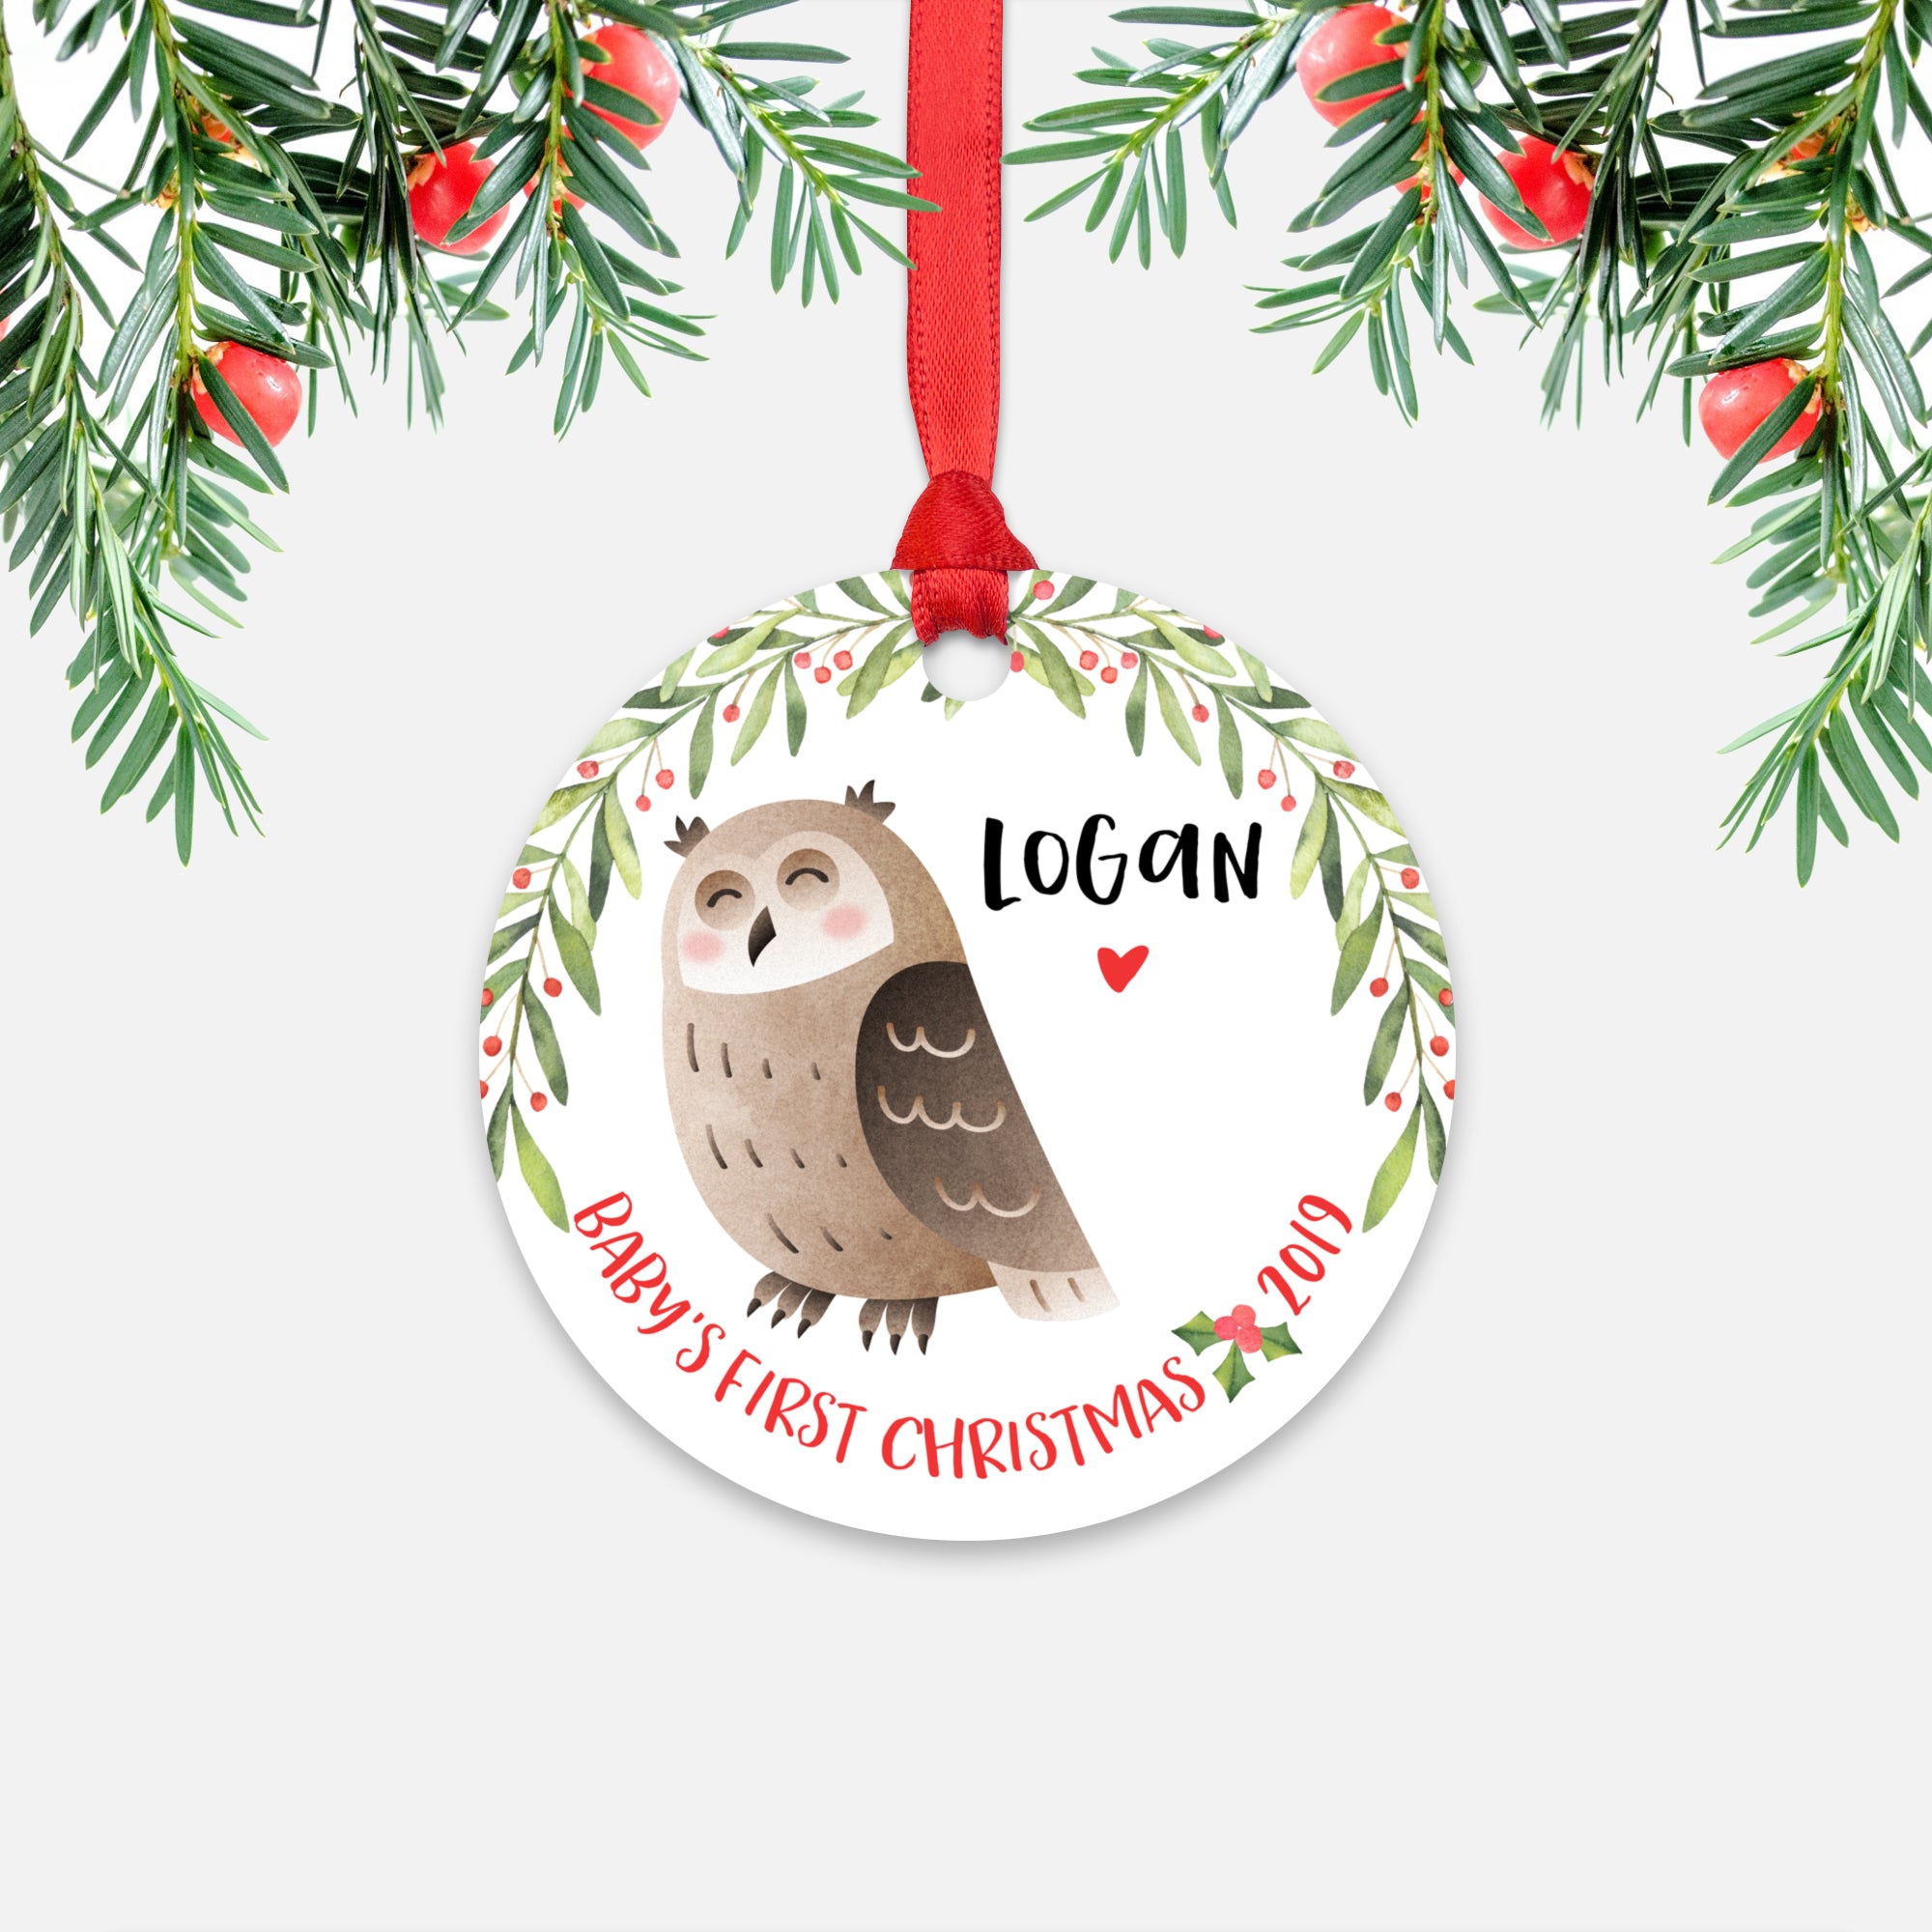 Owl Personalized Baby’s First Christmas Ornament for Baby Boy or Baby Girl - Cute Woodland Animal Baby 1st Holidays Decoration - Custom Christmas Gift Idea for New Parents - Round Aluminum - by Happy Cat Prints